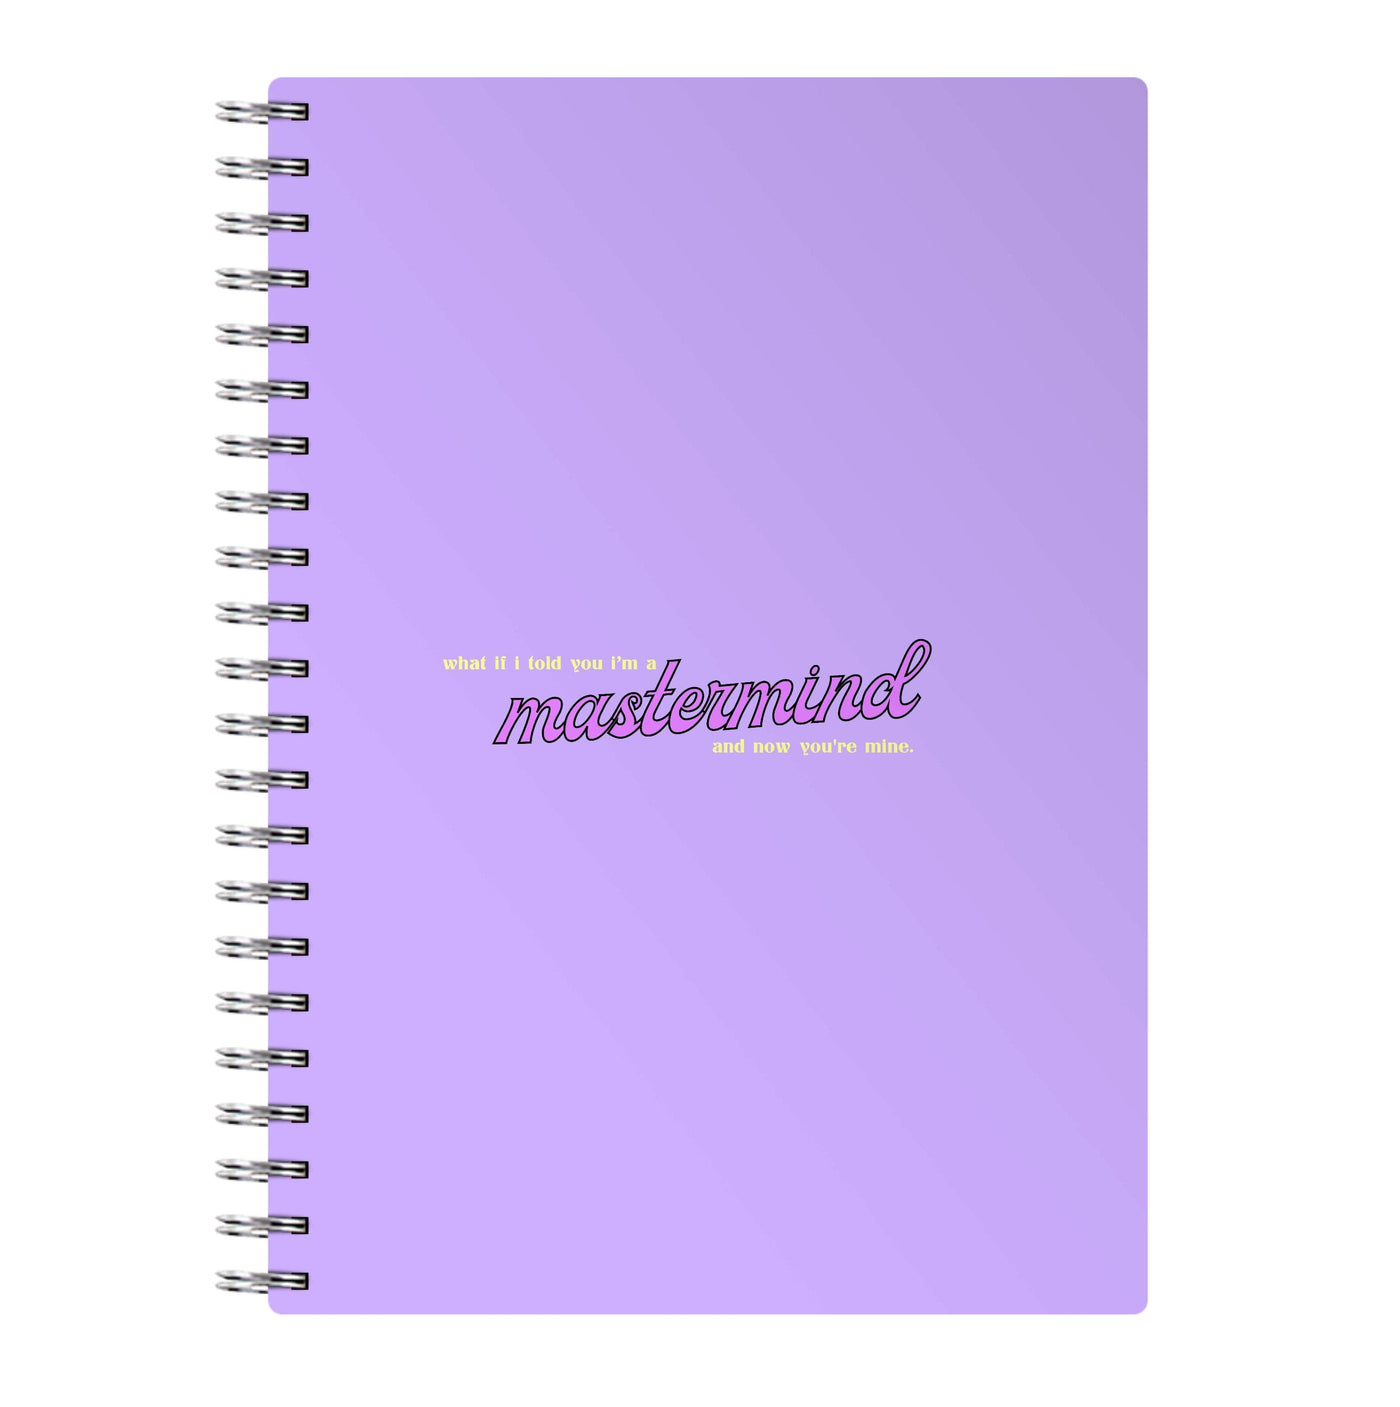 I'm A Mastermind And Now You're Mine - TikTok Trends Notebook